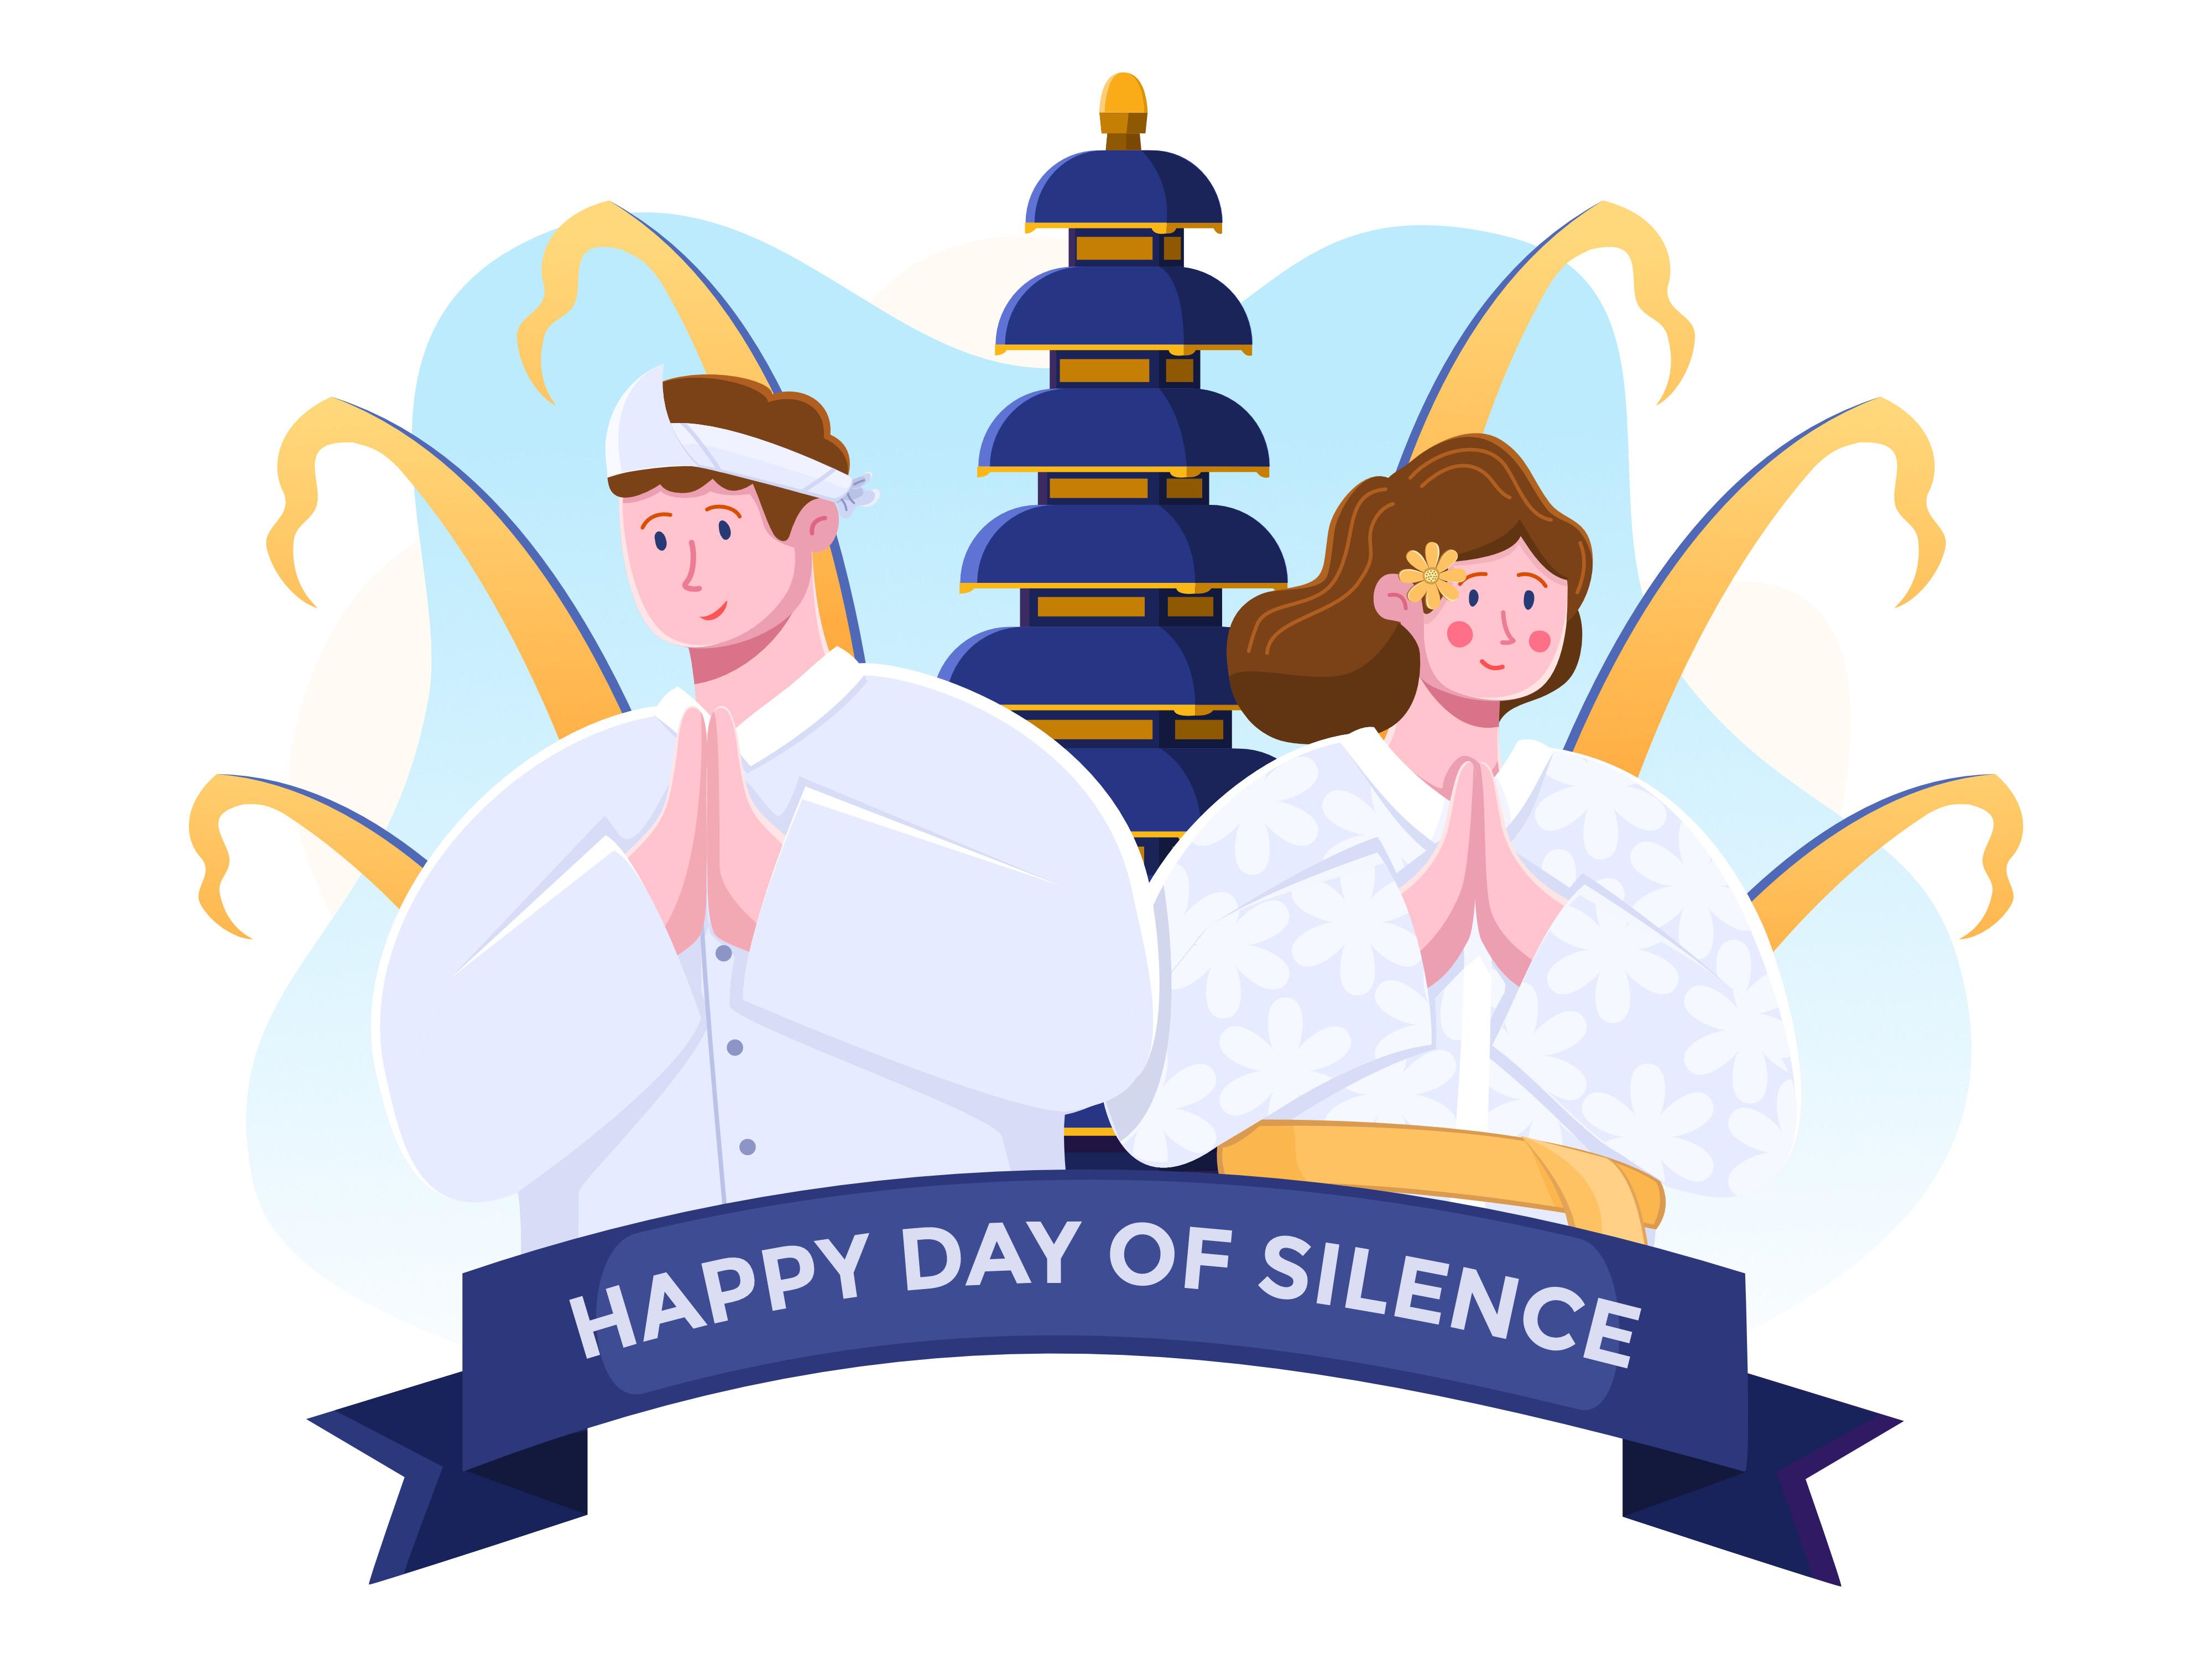 Person Greeting Happy Day of Silence